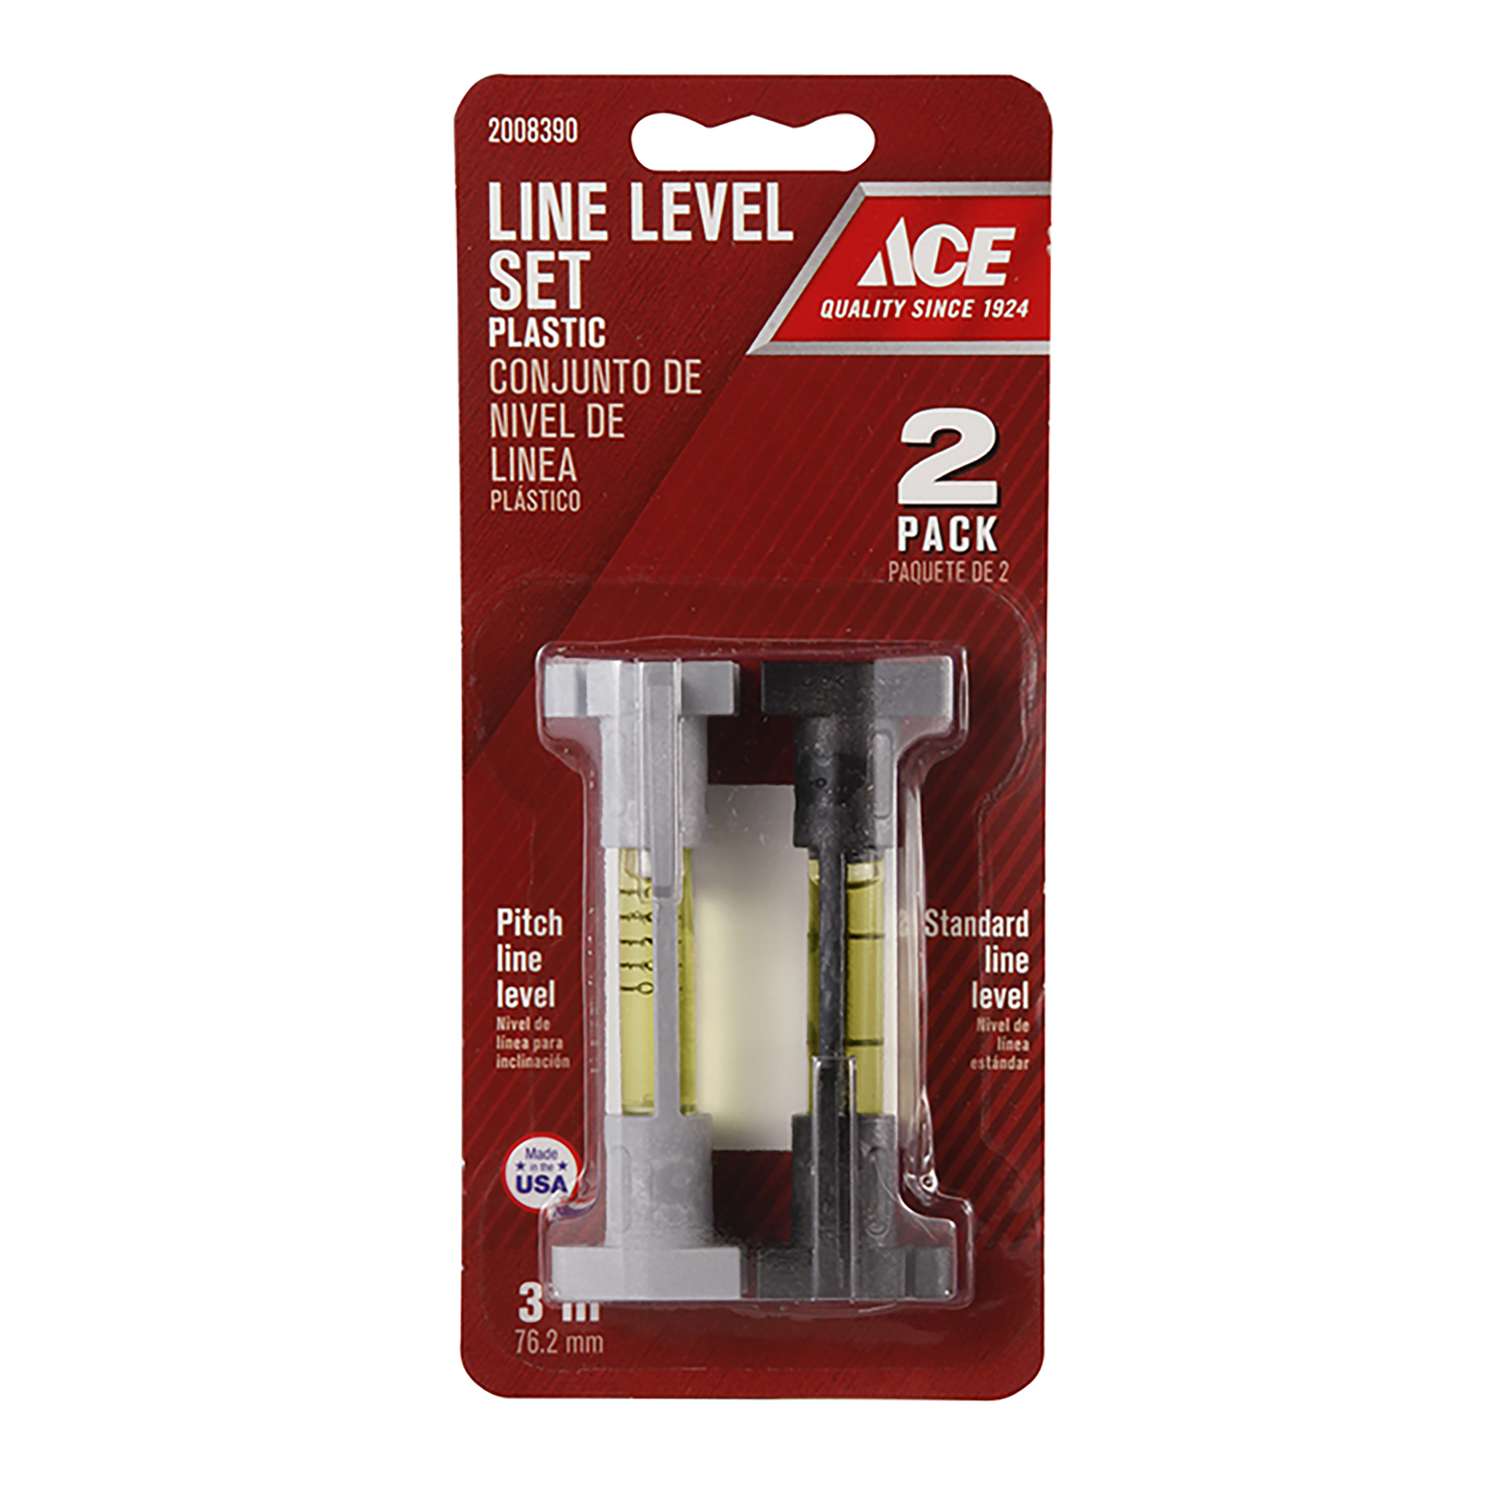 Ace 3 in. Line Level Set 1 vial - Ace Hardware